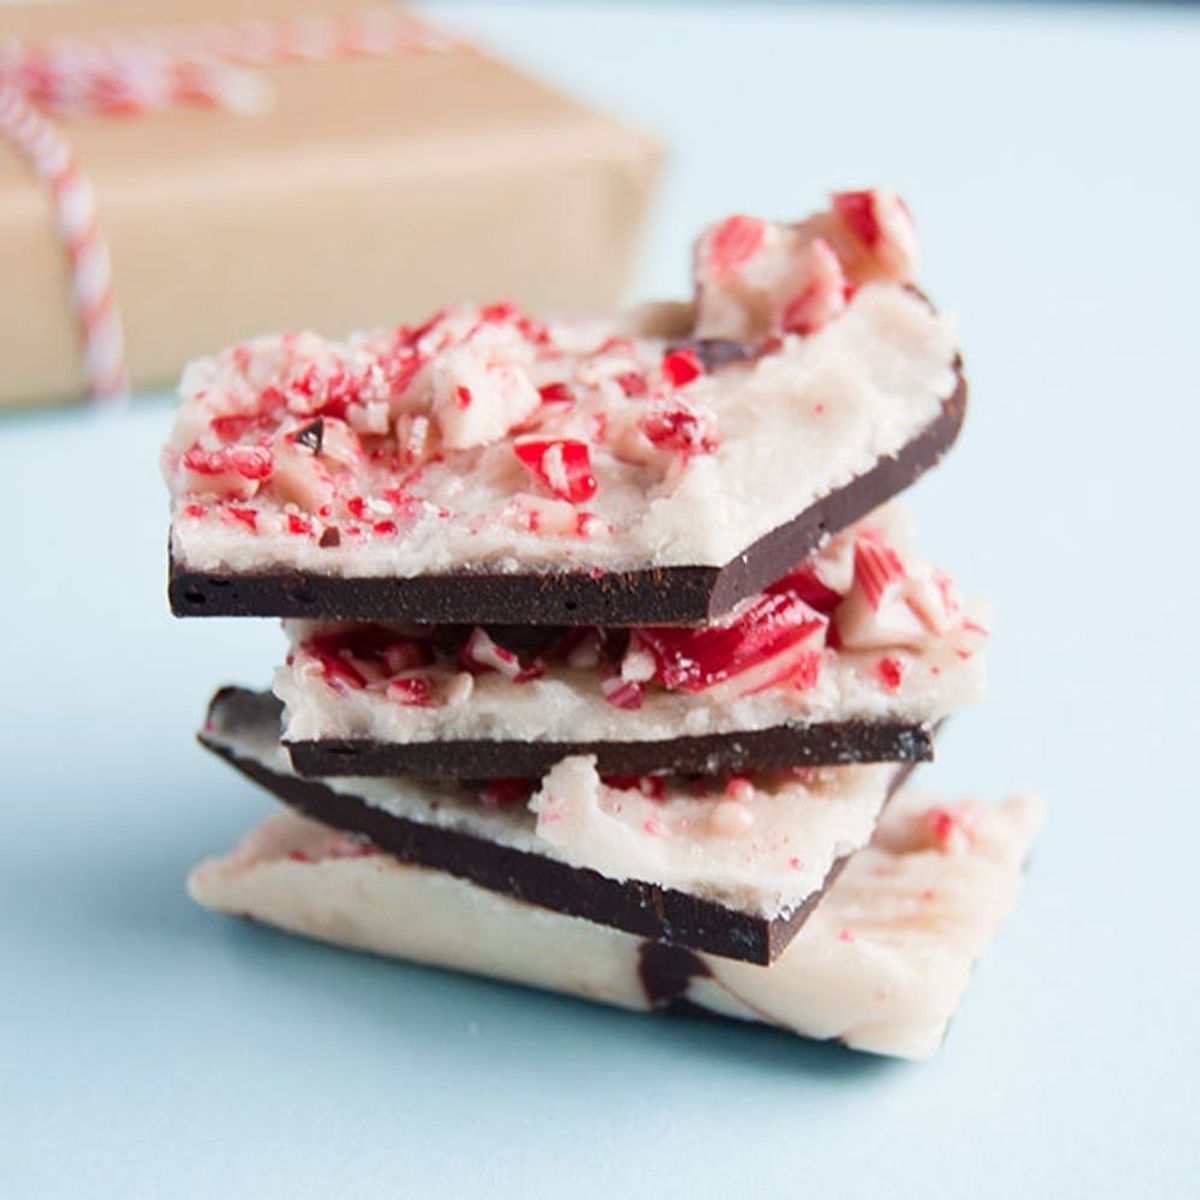 How To Make Healthy Peppermint Bark That's A Total Crowd Pleaser